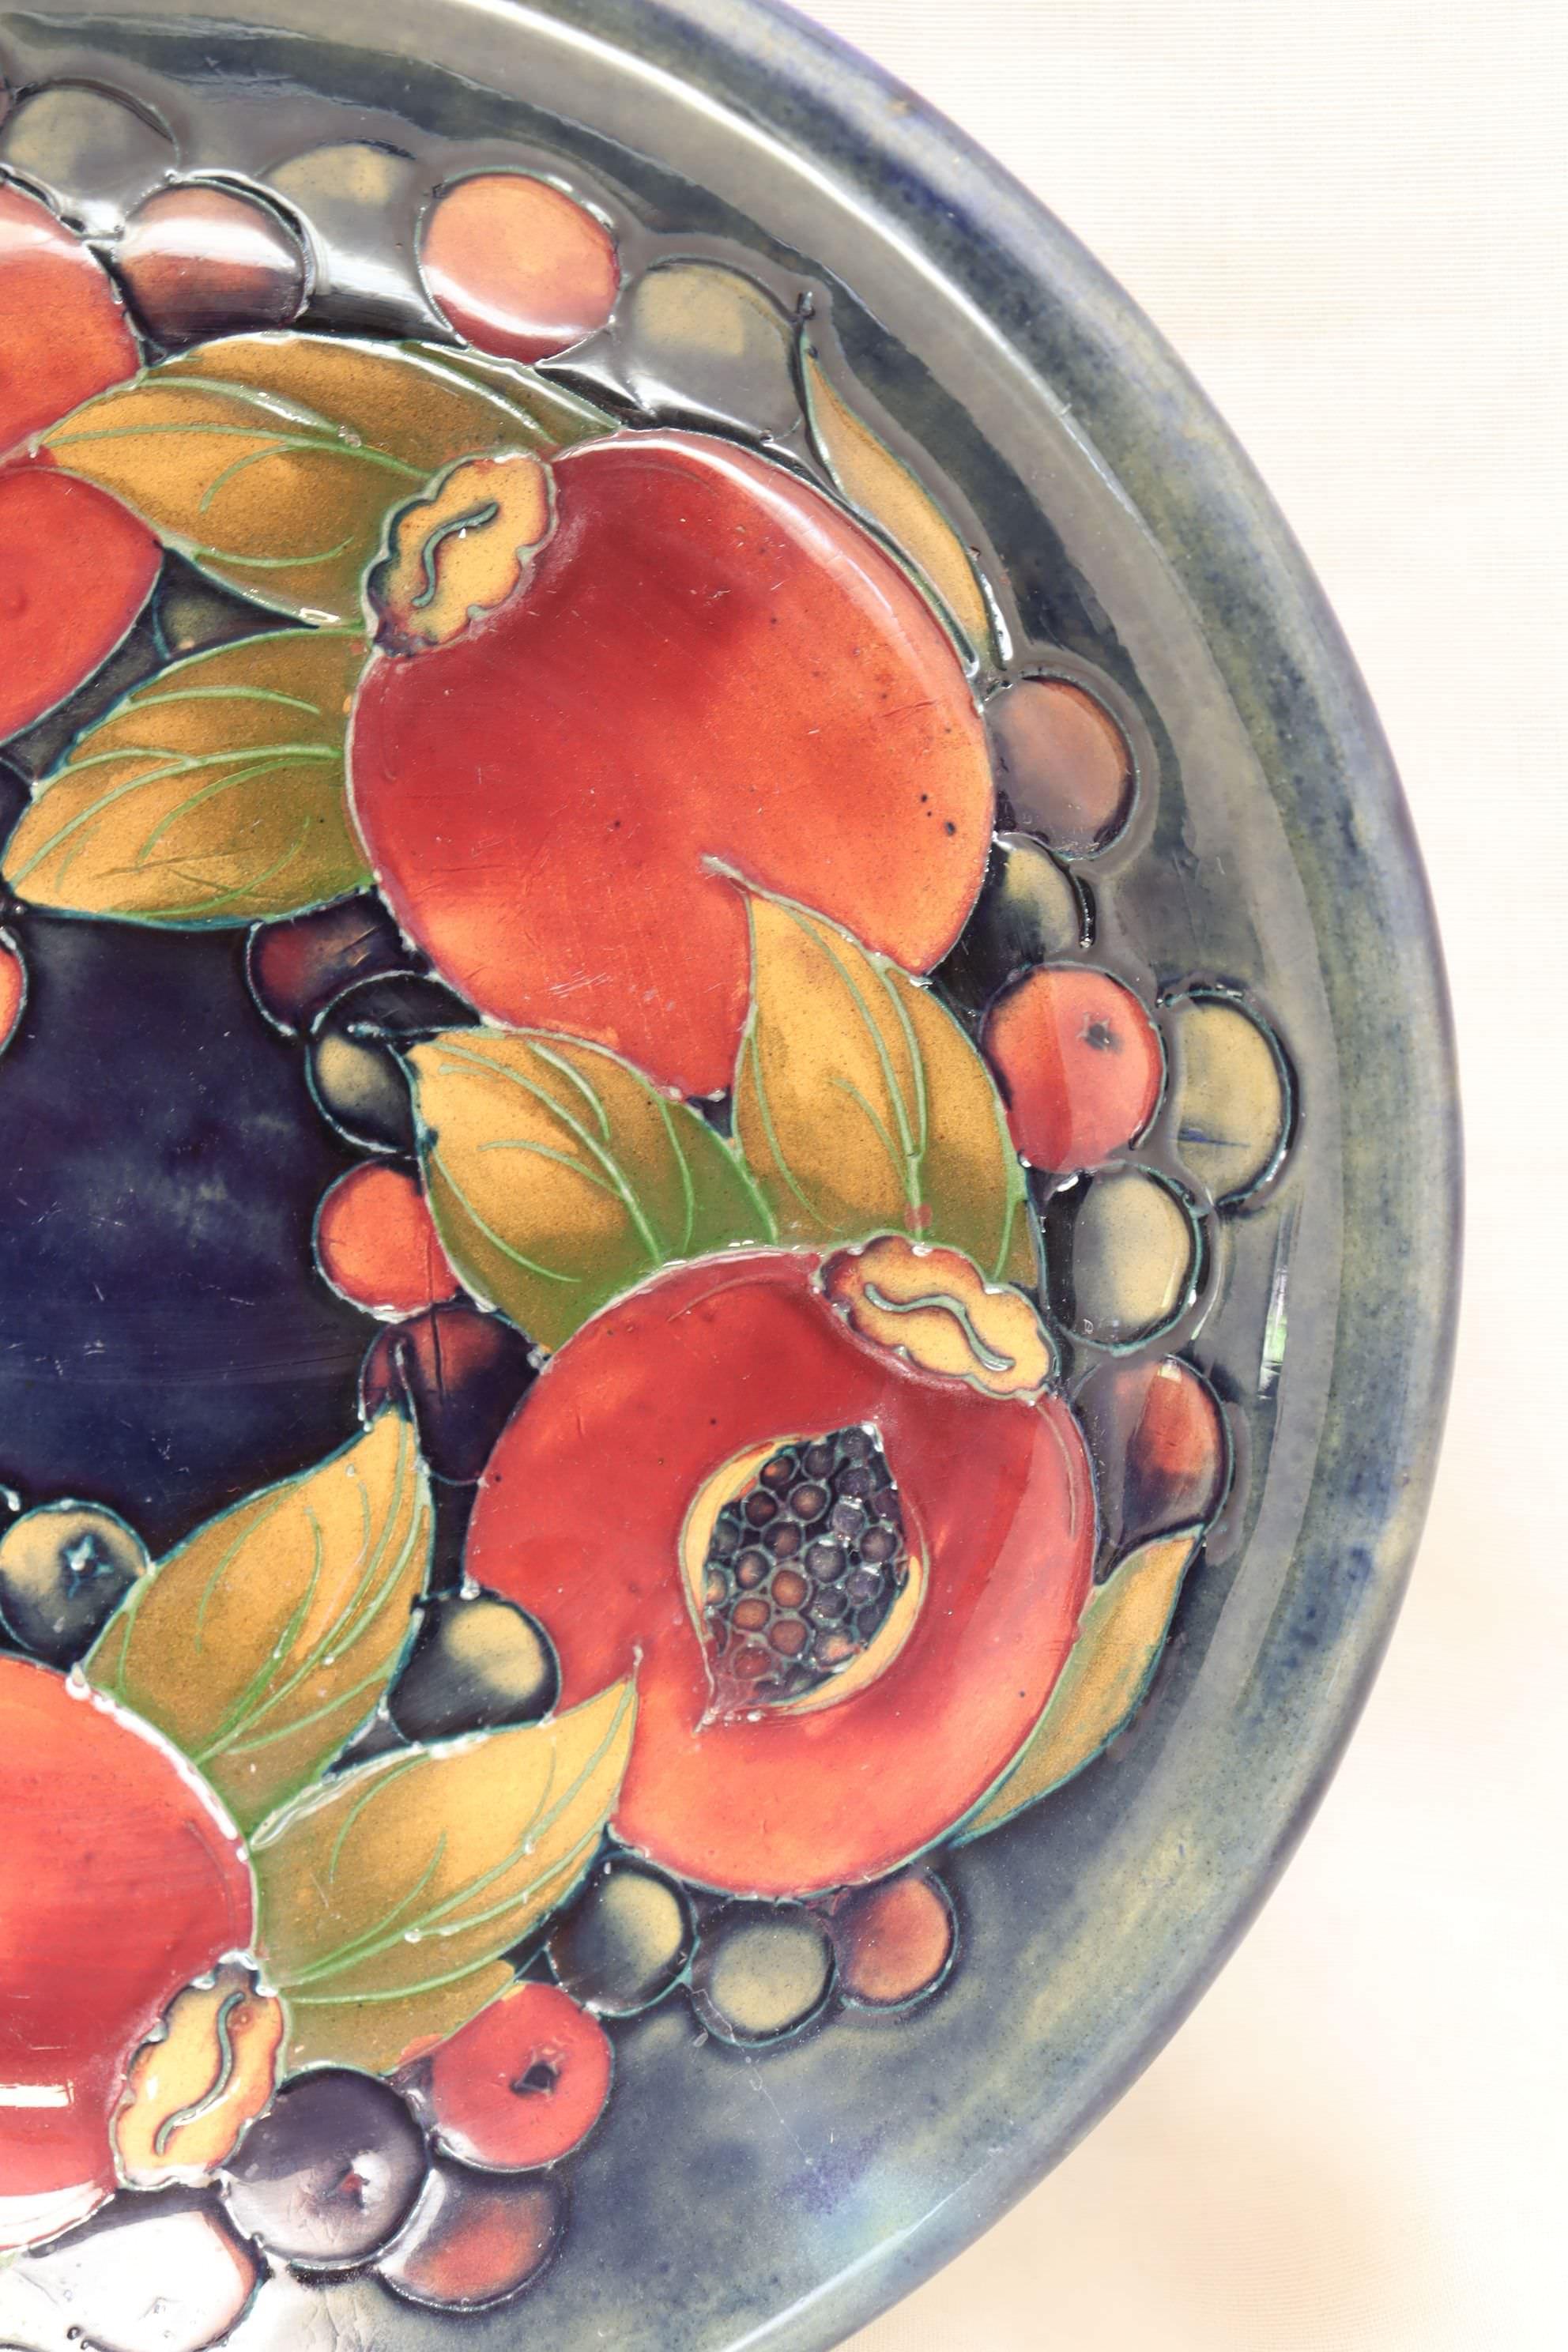 This Moorcroft bowl is decorated with the 